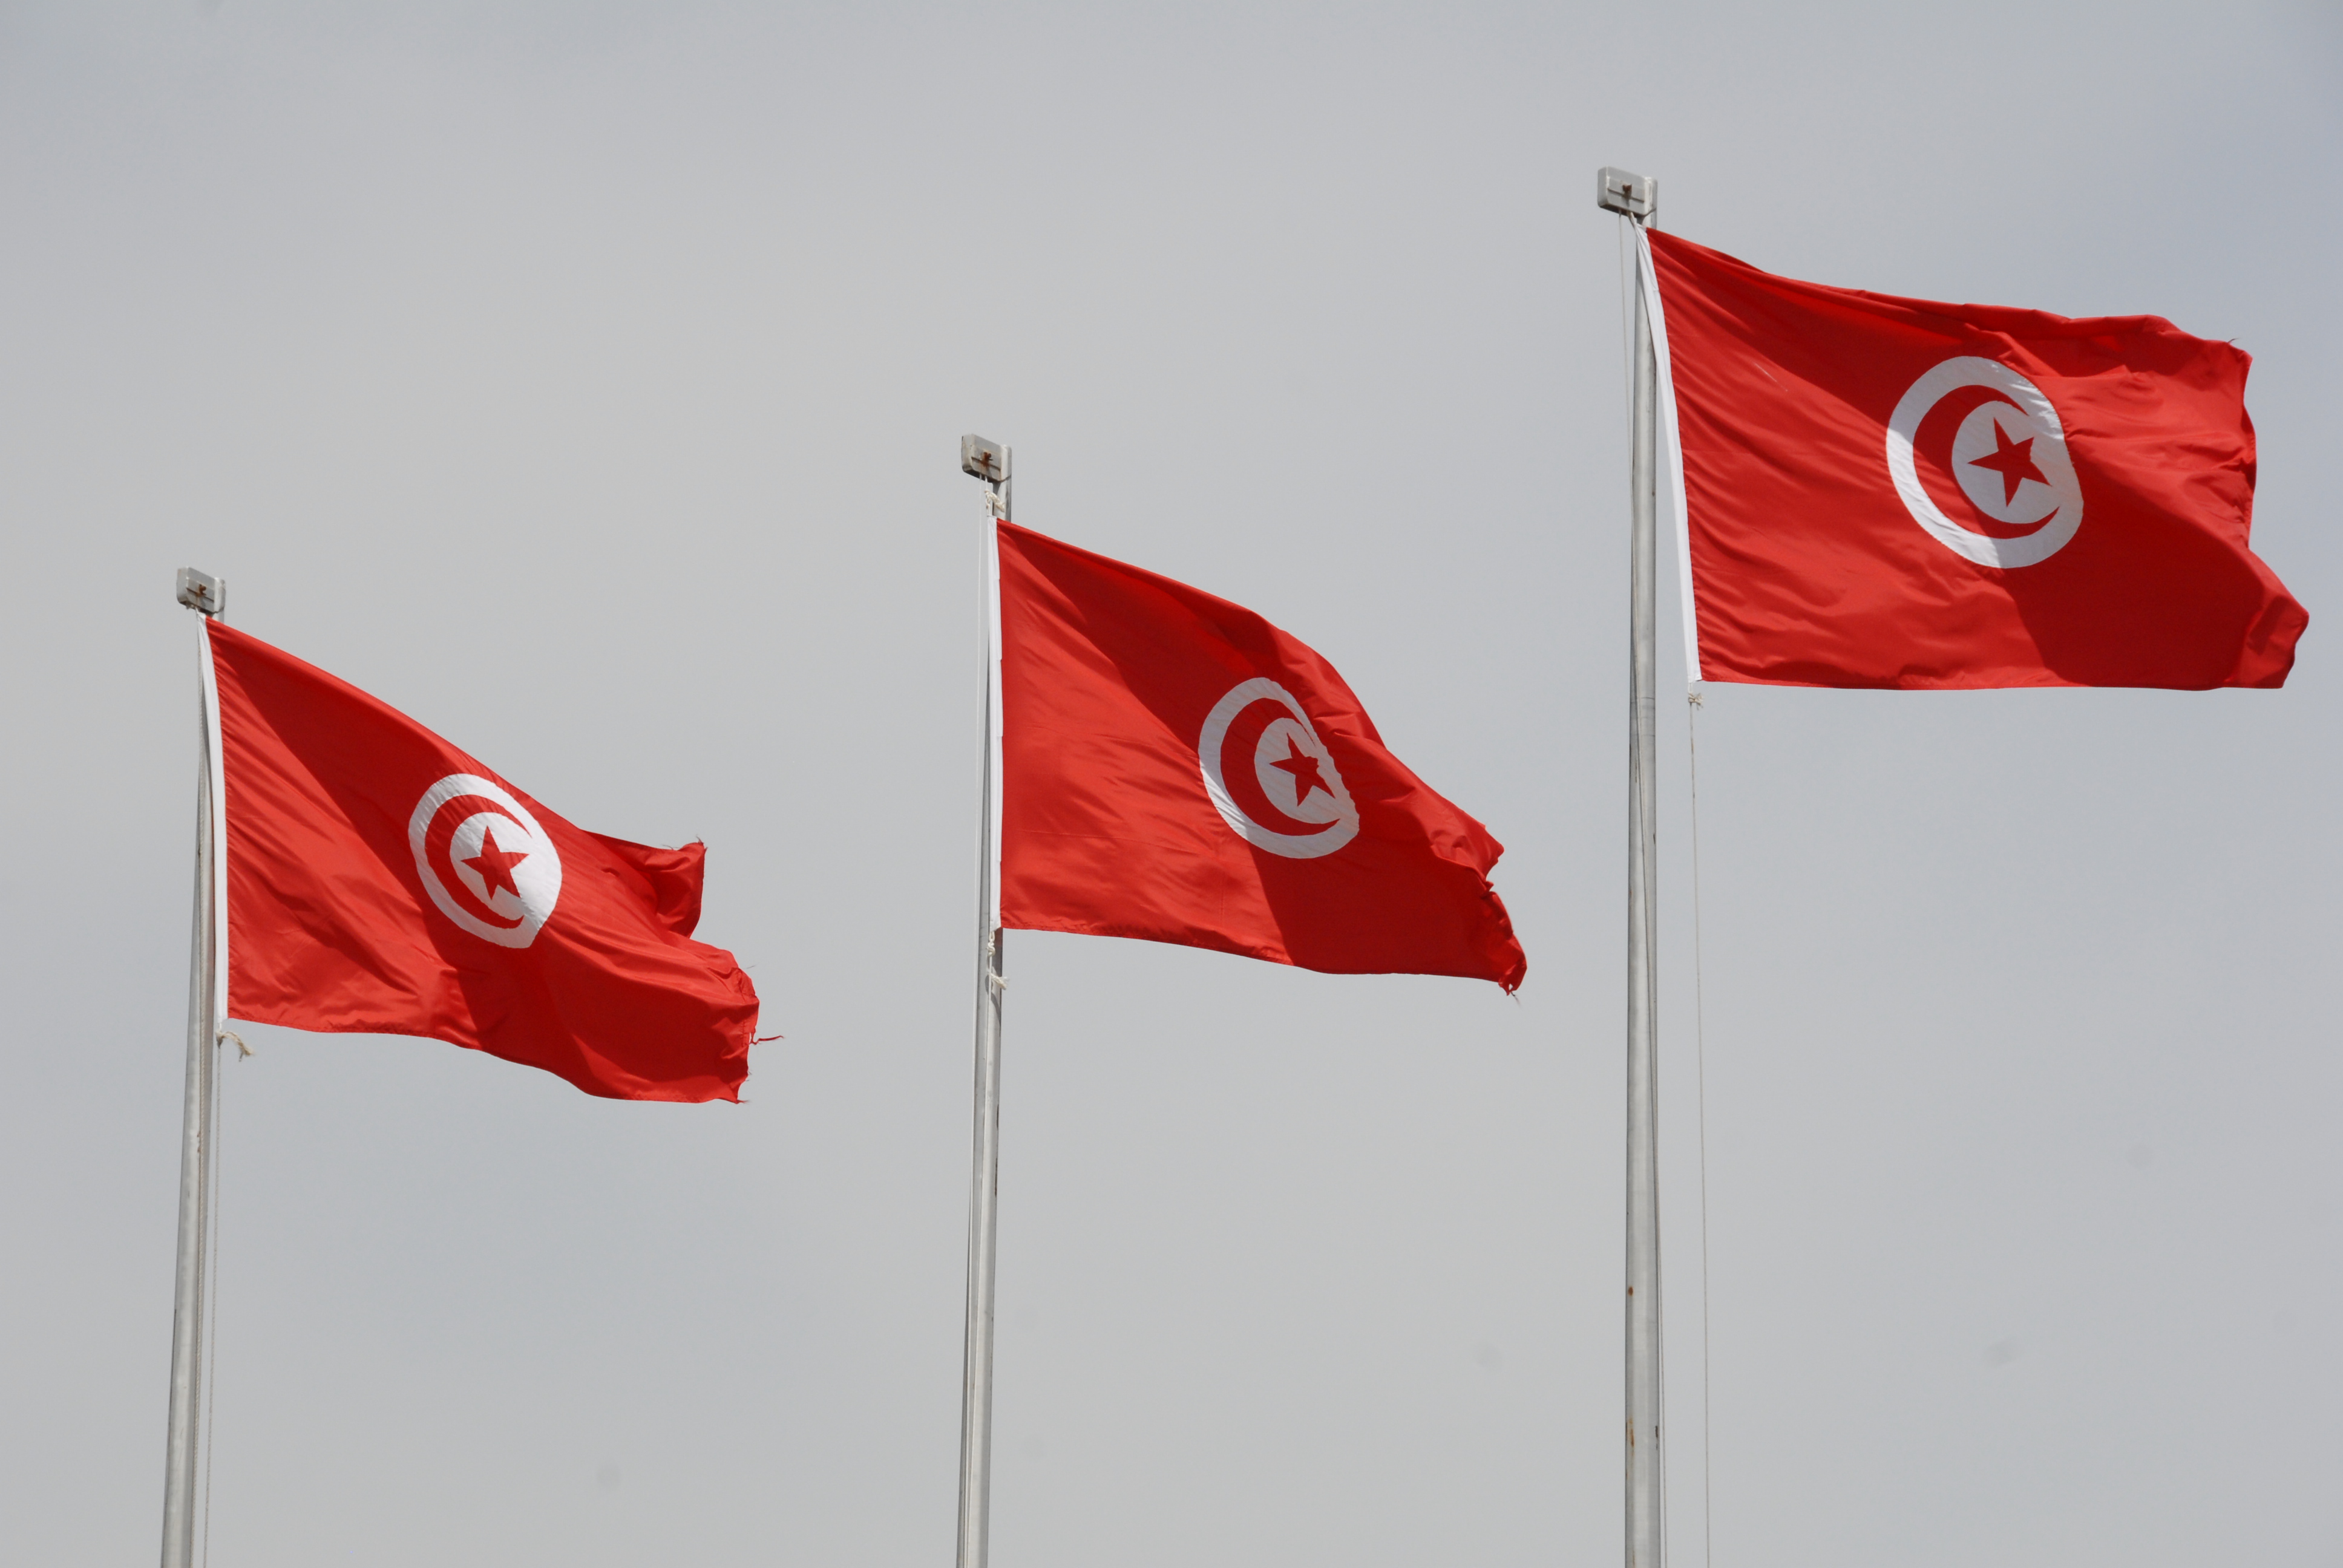 Cabinet reshuffle in Tunisia, 10 new ministers named